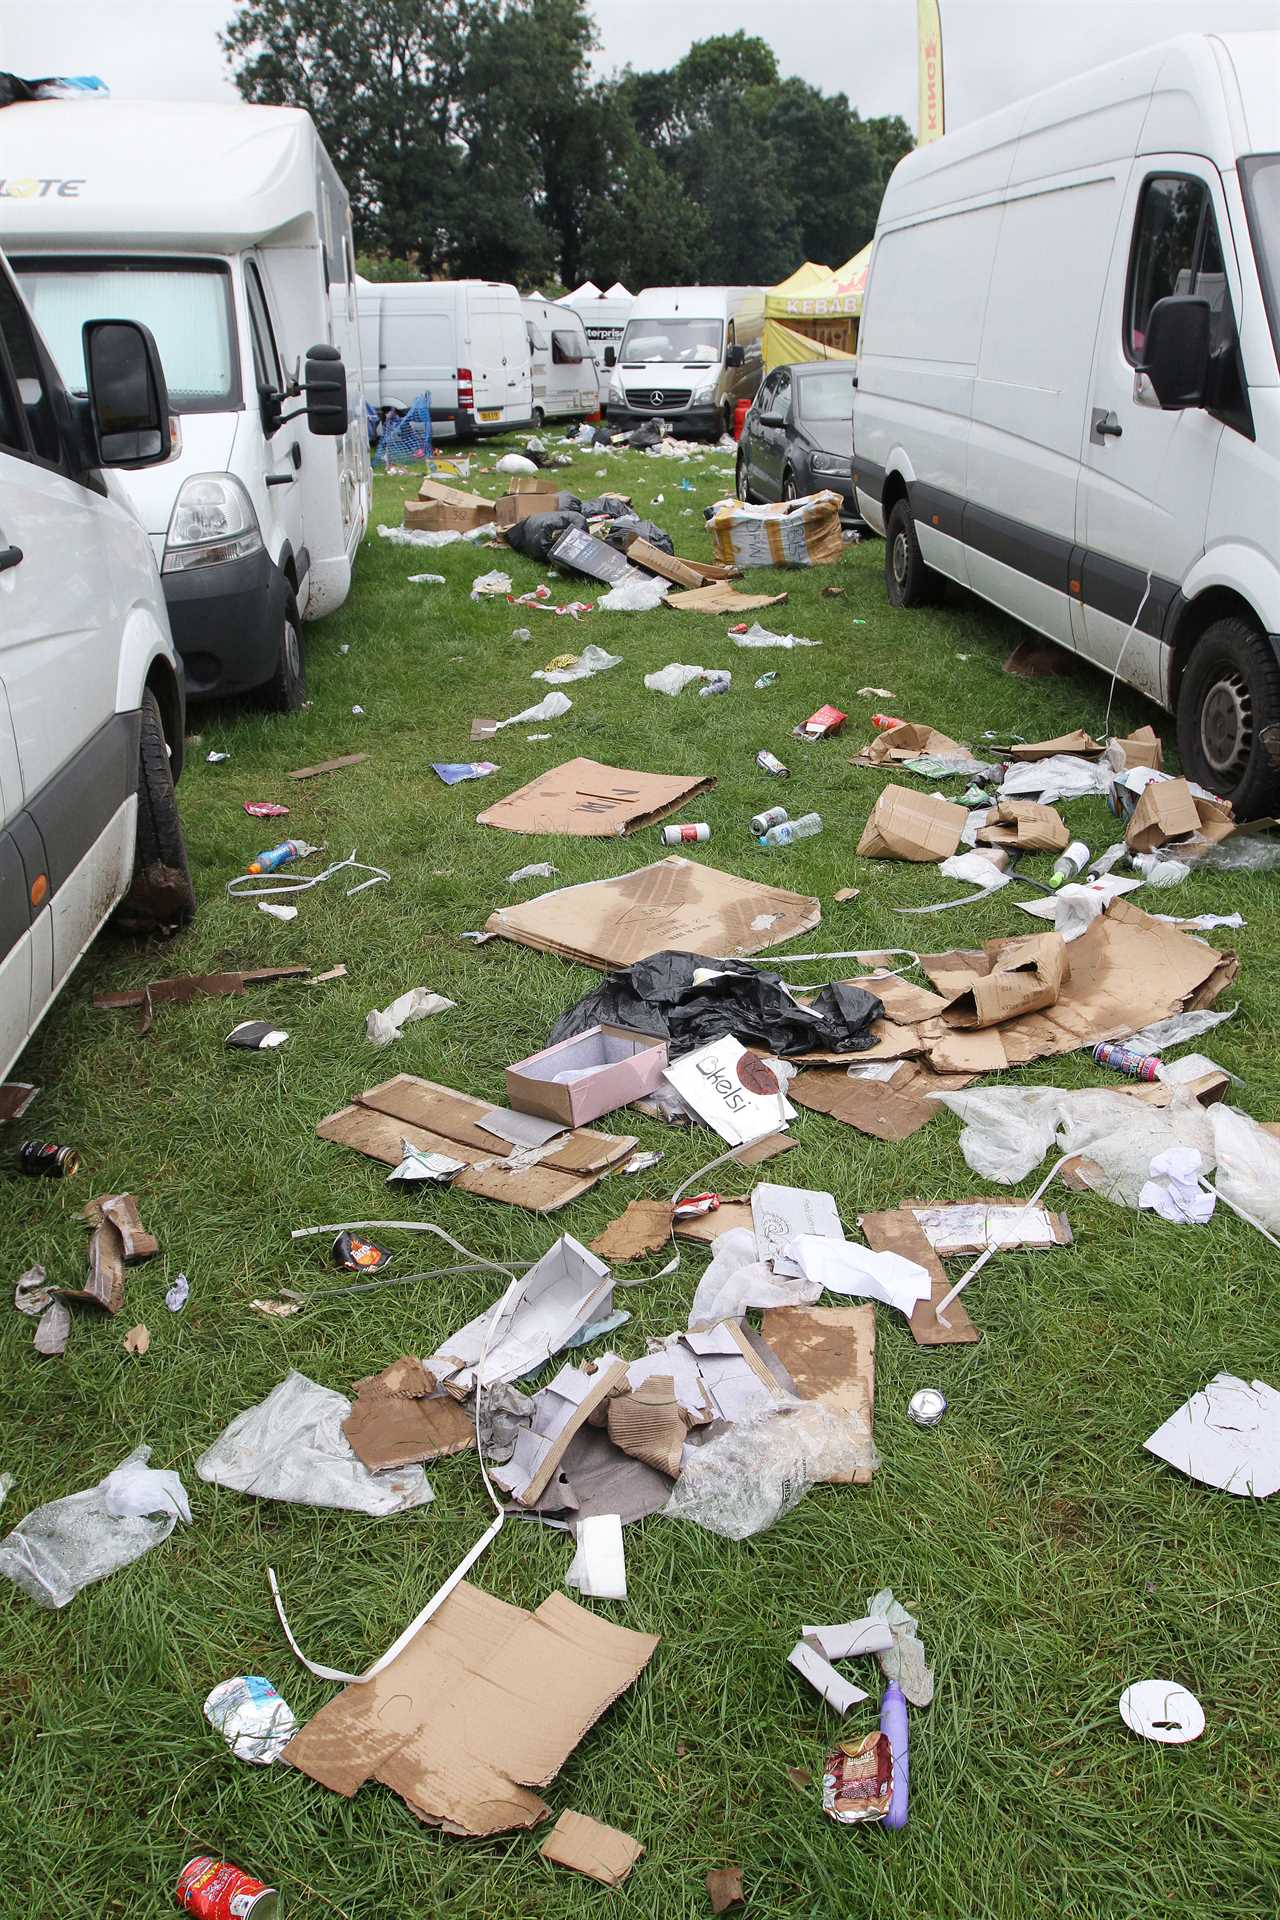 Appleby Horse Fair: Caravan torched, horse manure on roads & rubbish strewn across fields in traveller festival carnage